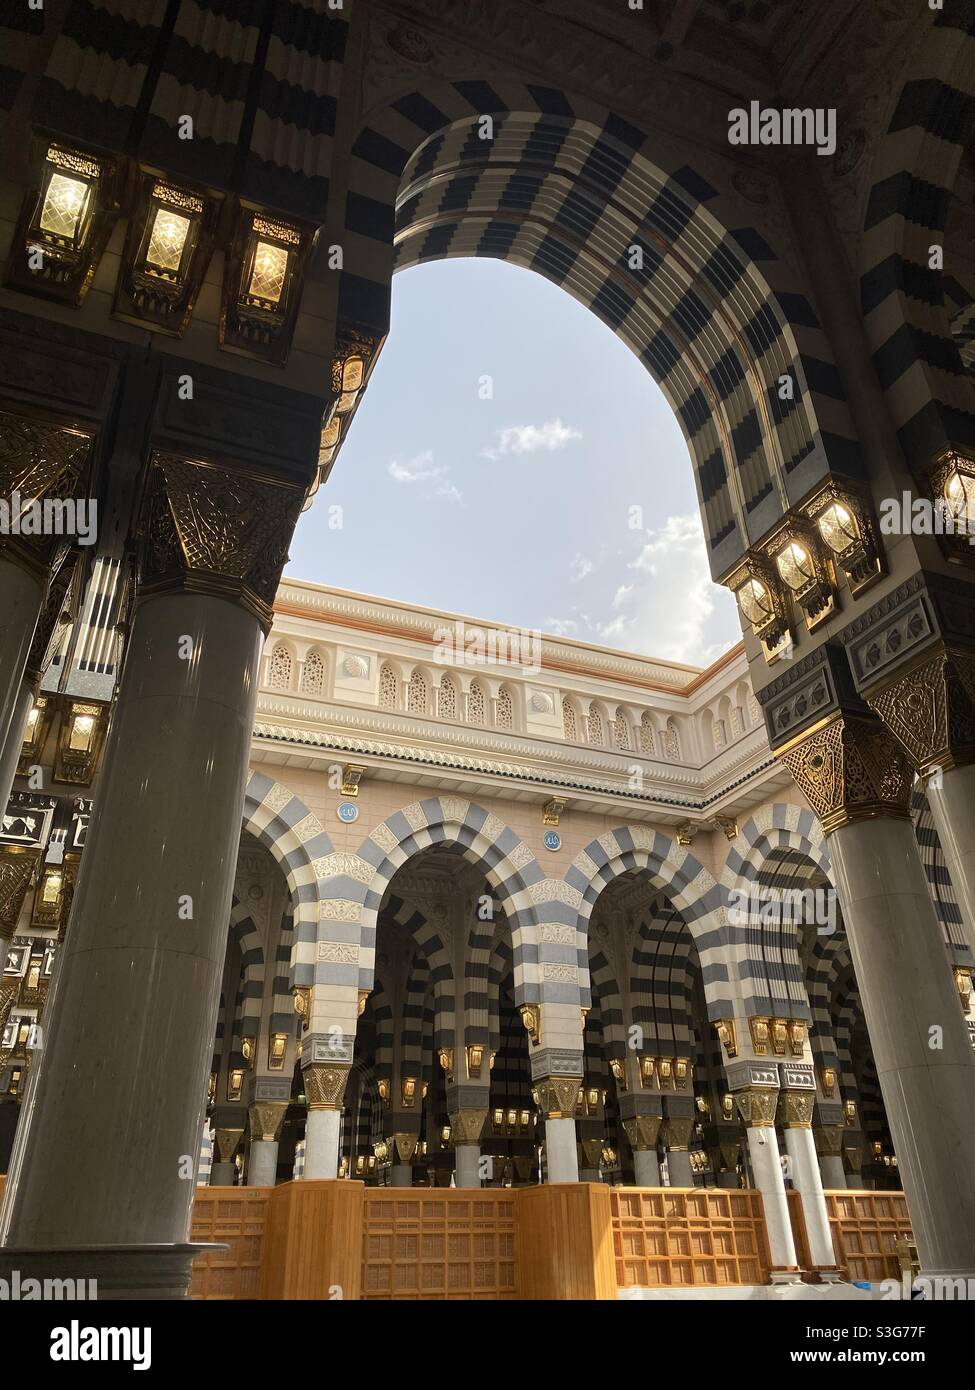 Inside the mosque in Madinah, pillars and a cloudy blue sky in the ...